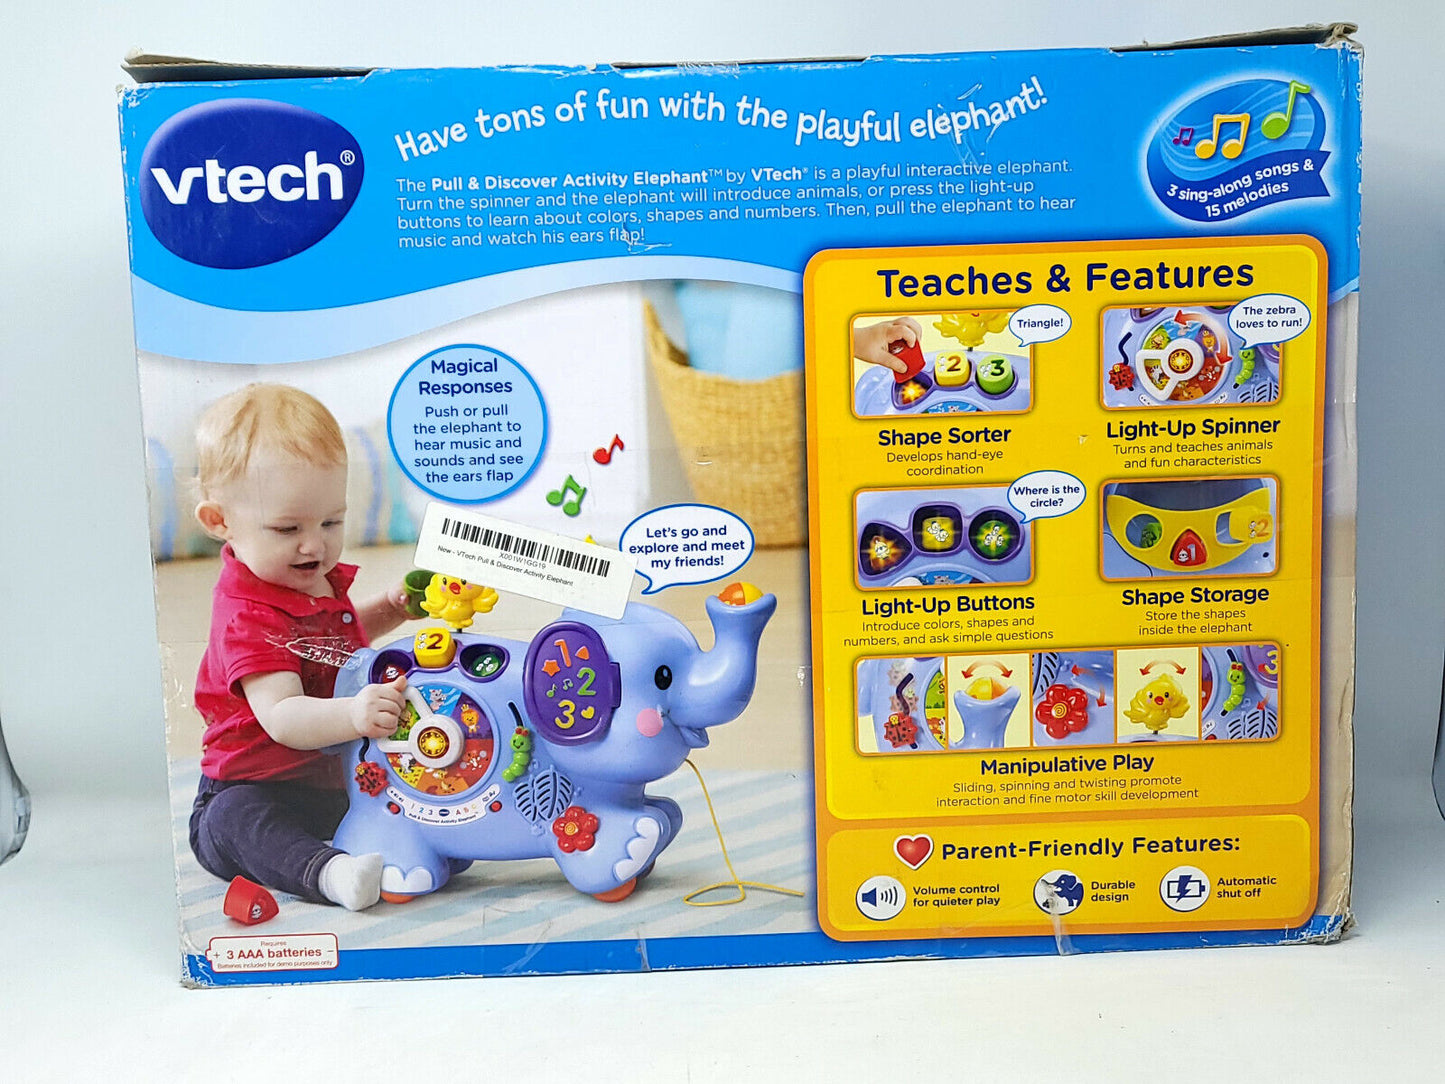 VTech Pull and Discover Activity Elephant Infant Toddler Learning Toy - READ